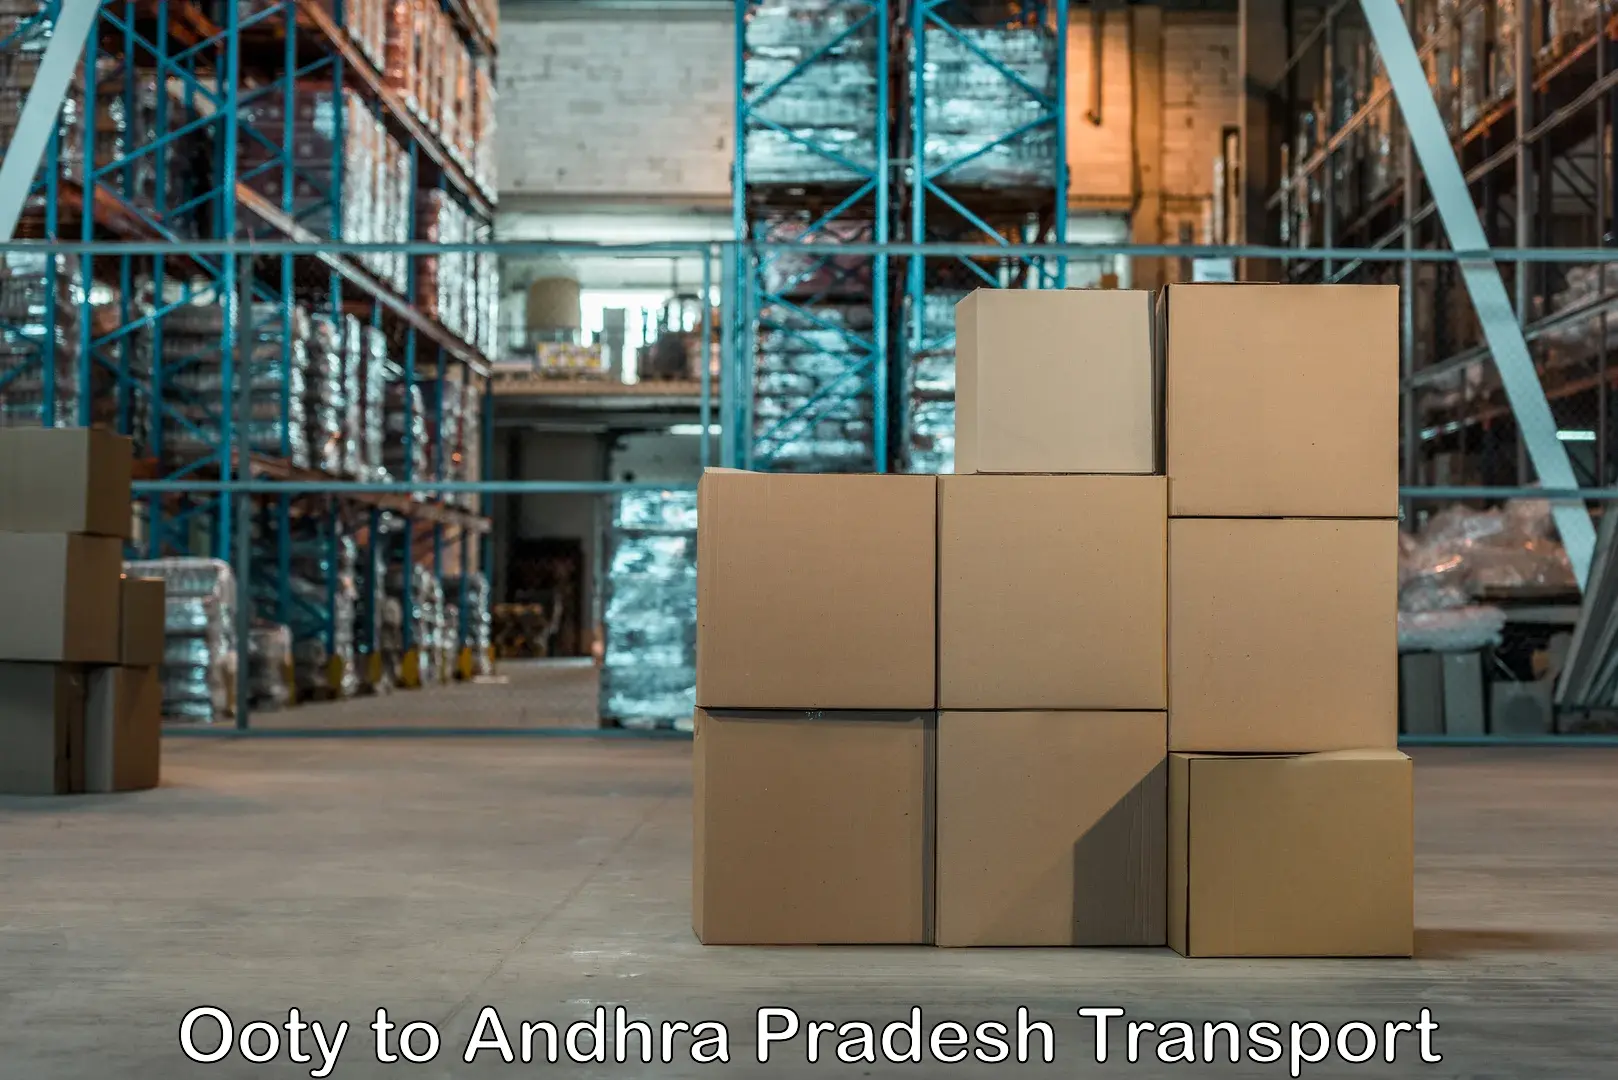 Cargo transport services in Ooty to Mantada